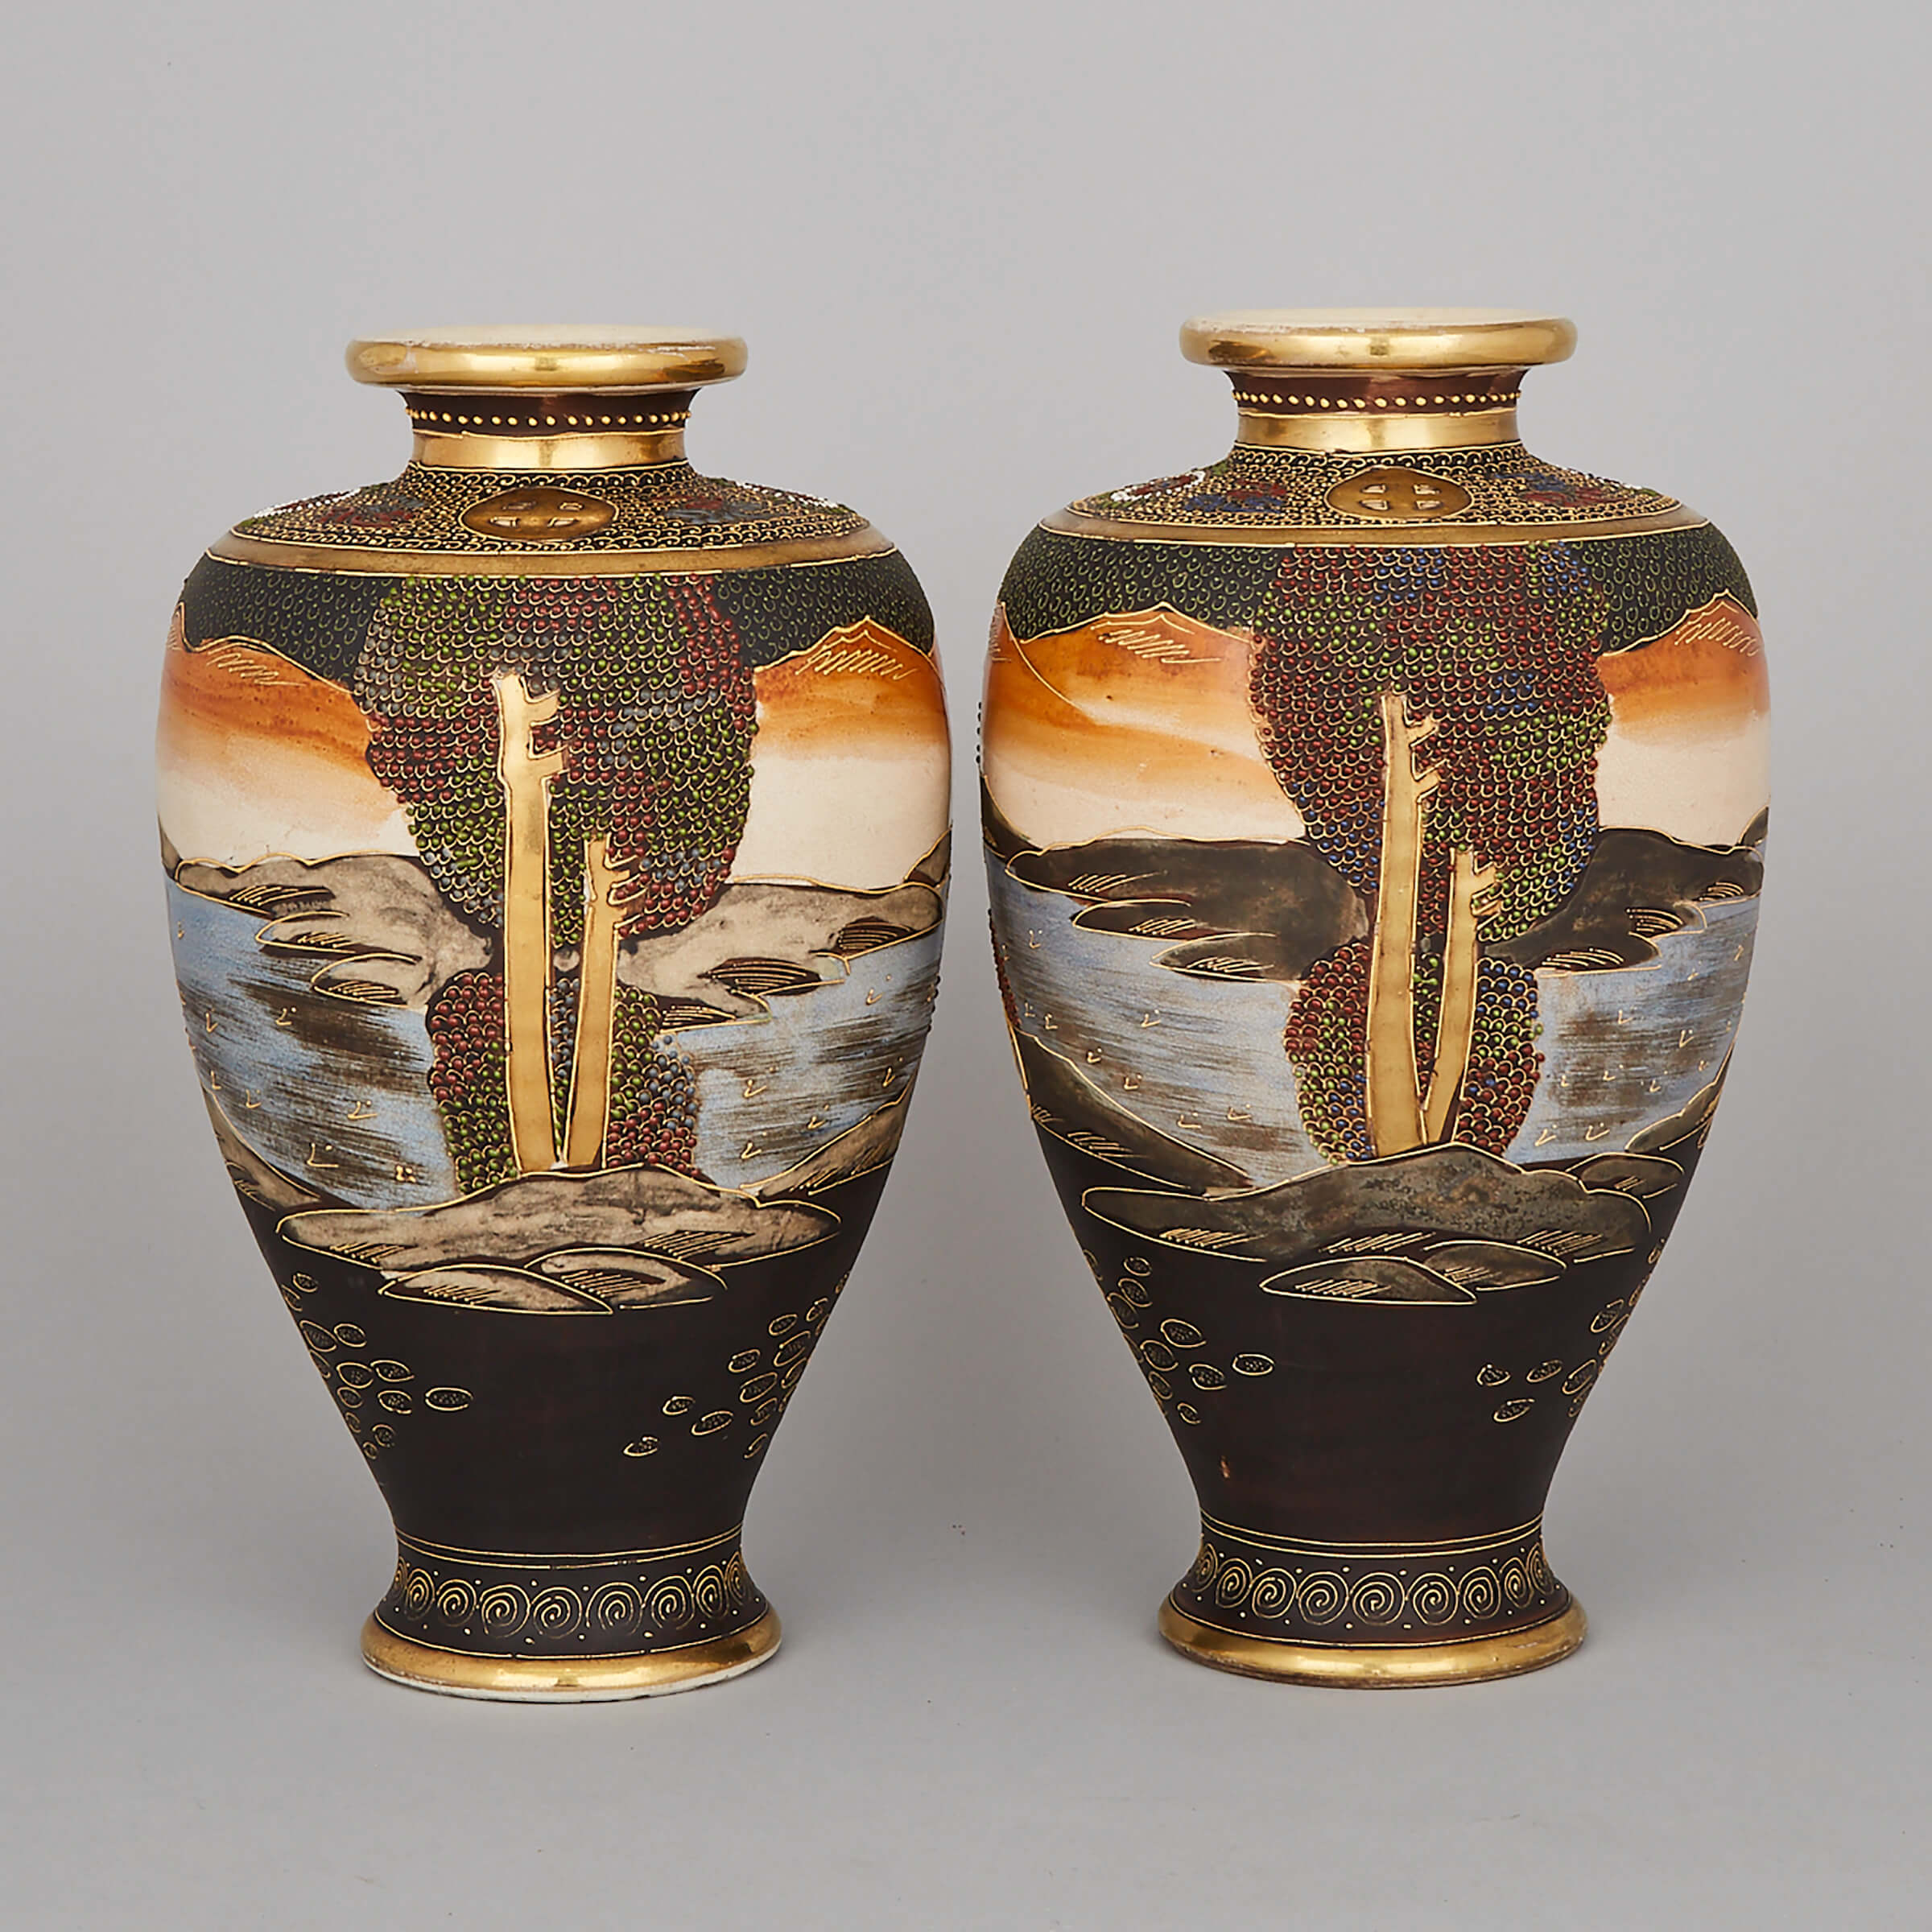 A Pair of Large Satsuma Vases